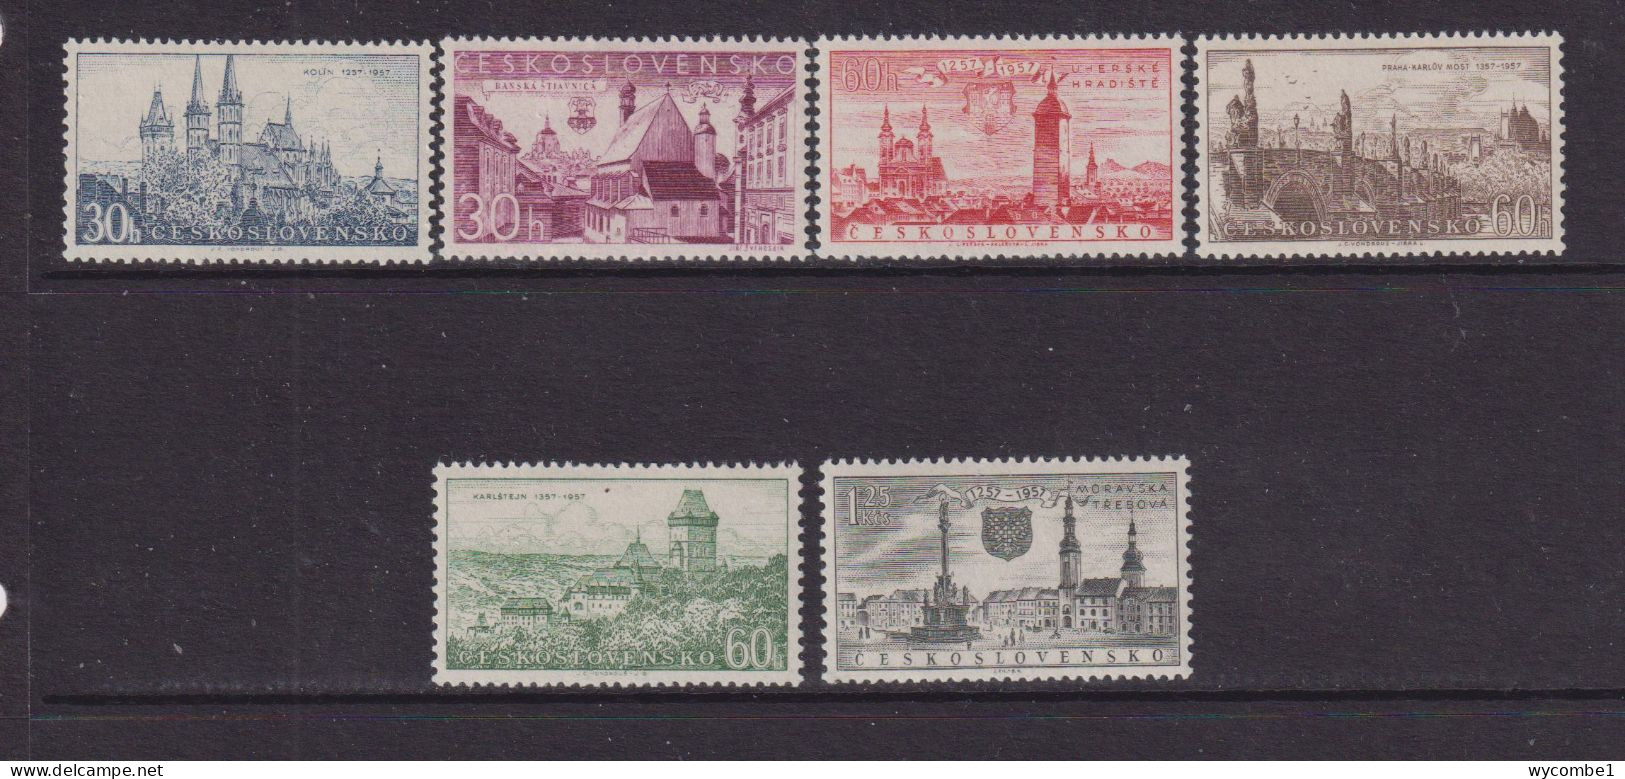 CZECHOSLOVAKIA  - 1957  Towns And Monuments Set  Never Hinged Mint - Ungebraucht